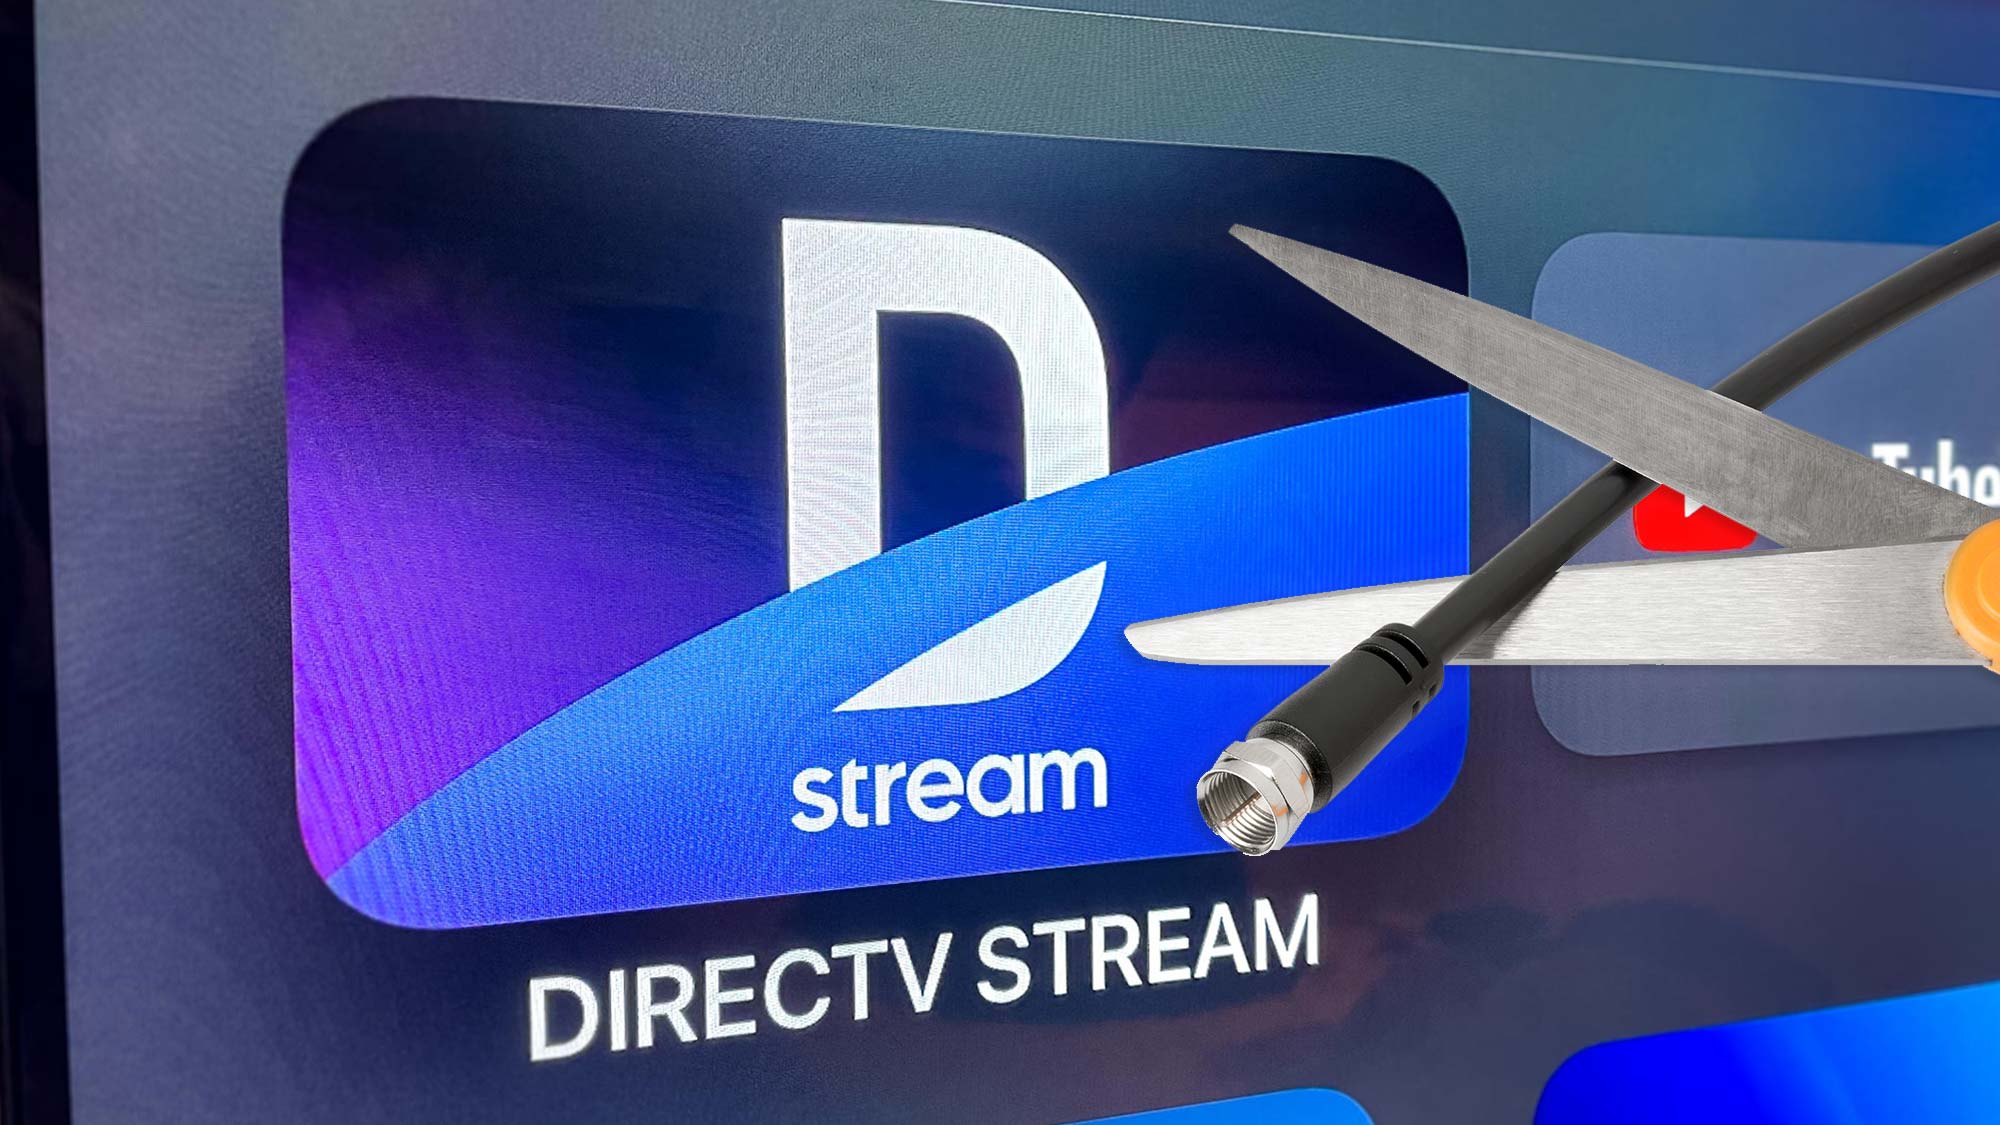 I'm testing DirecTV Stream to cut the cord — here's the pros and cons